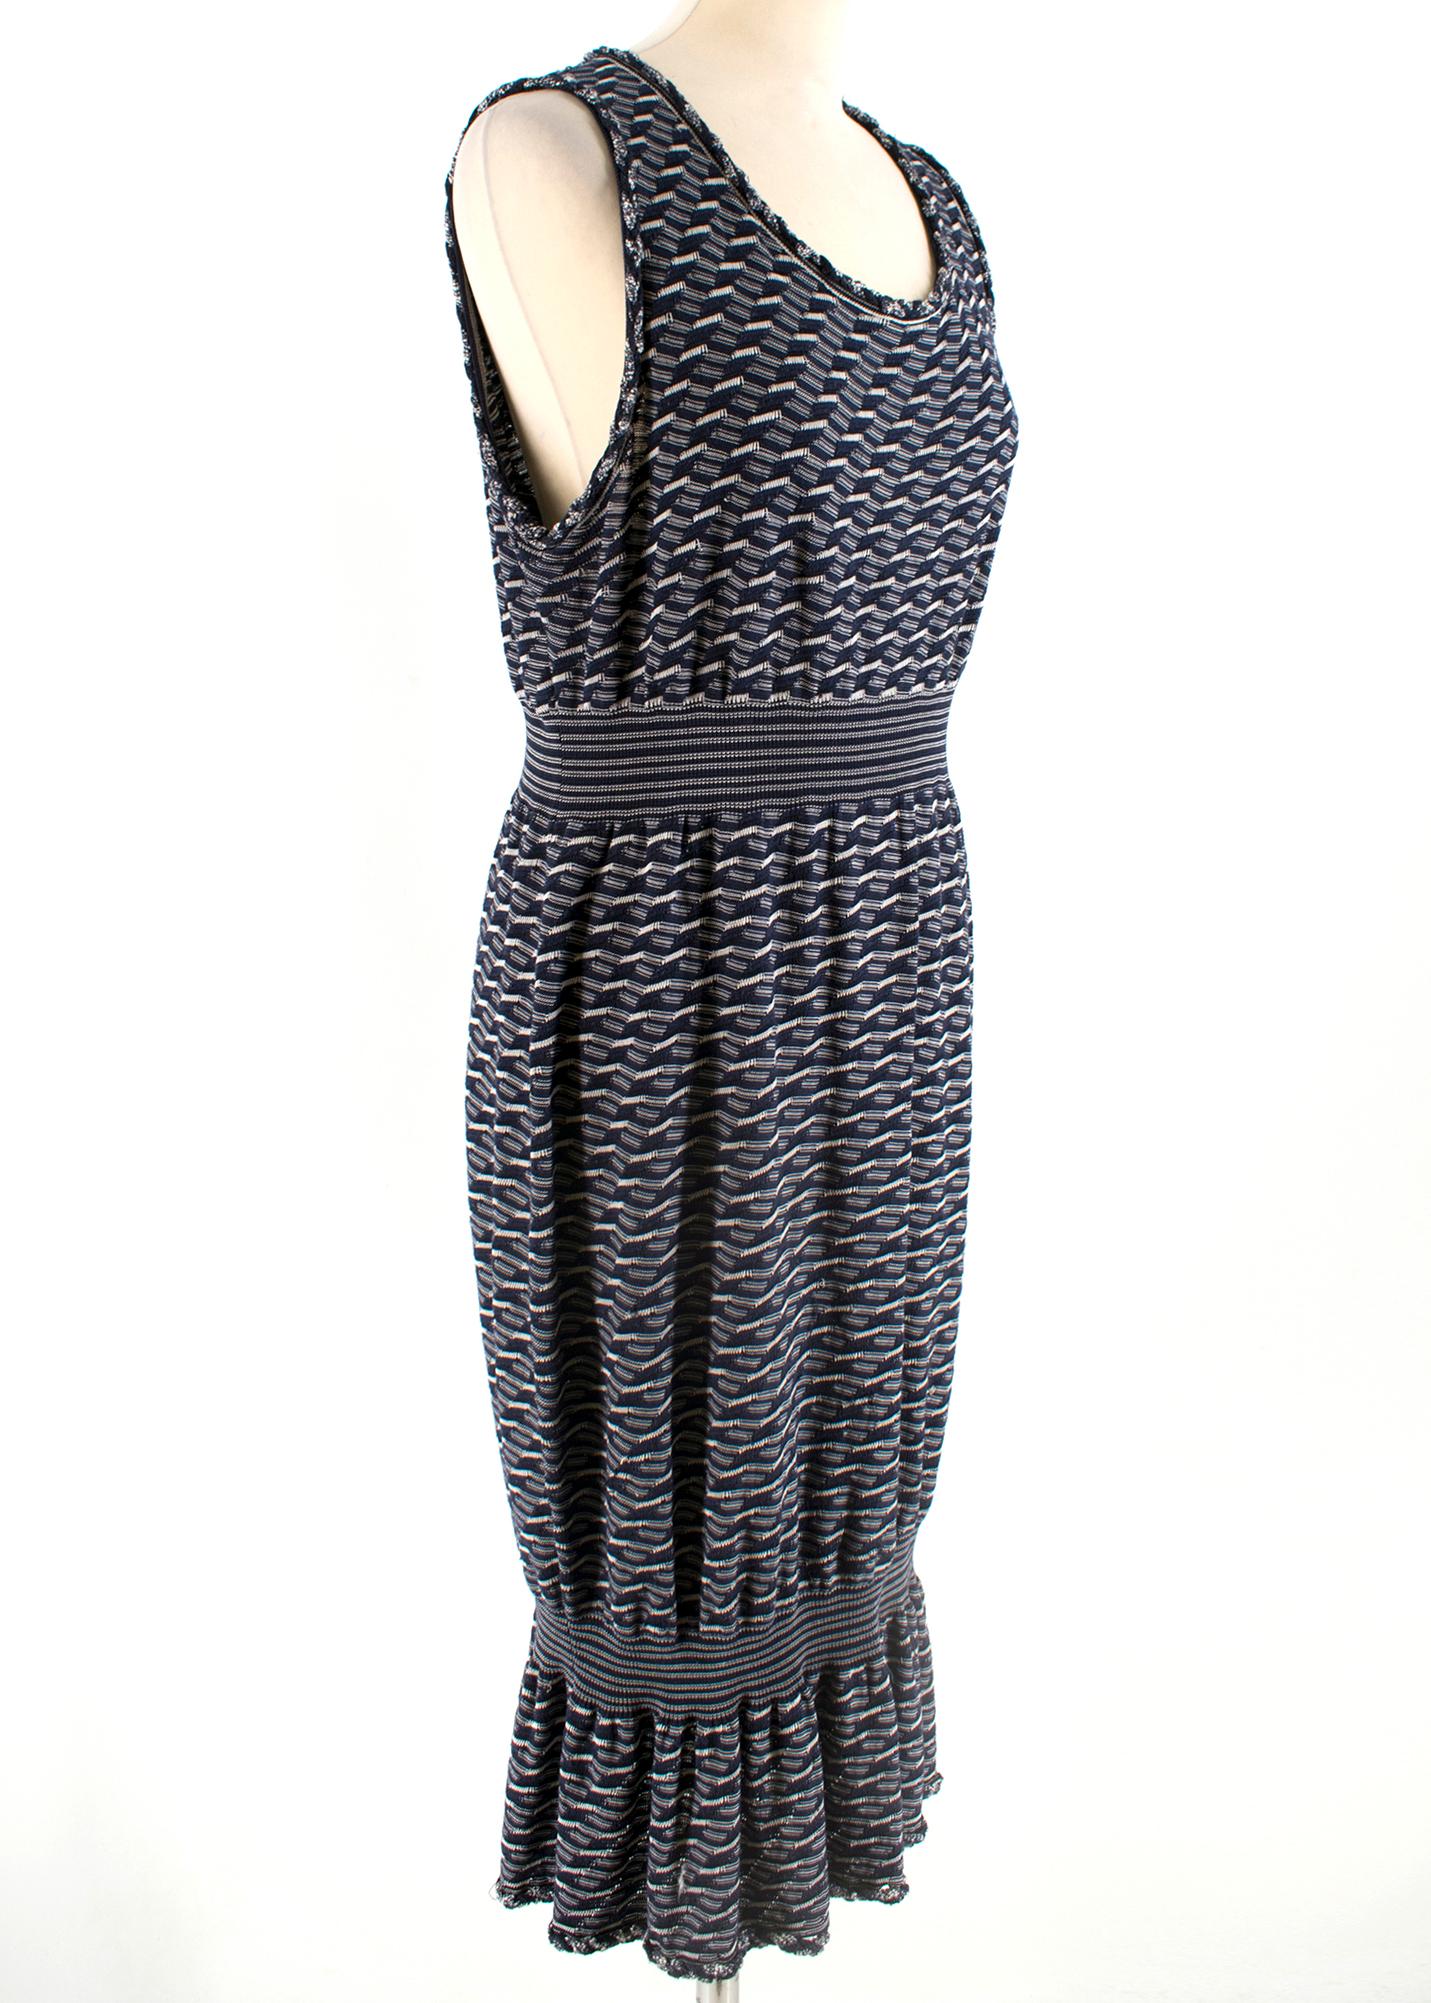 Chanel Navy Knit Sleeveless Dress

- Elastic waist dress and elastic bottom
- Great for the day time

All measurements are taken seam to seam:
Waist: 37cm 


60% Viscose, 25% Cotton, 10% Polyester and 5% Nylo